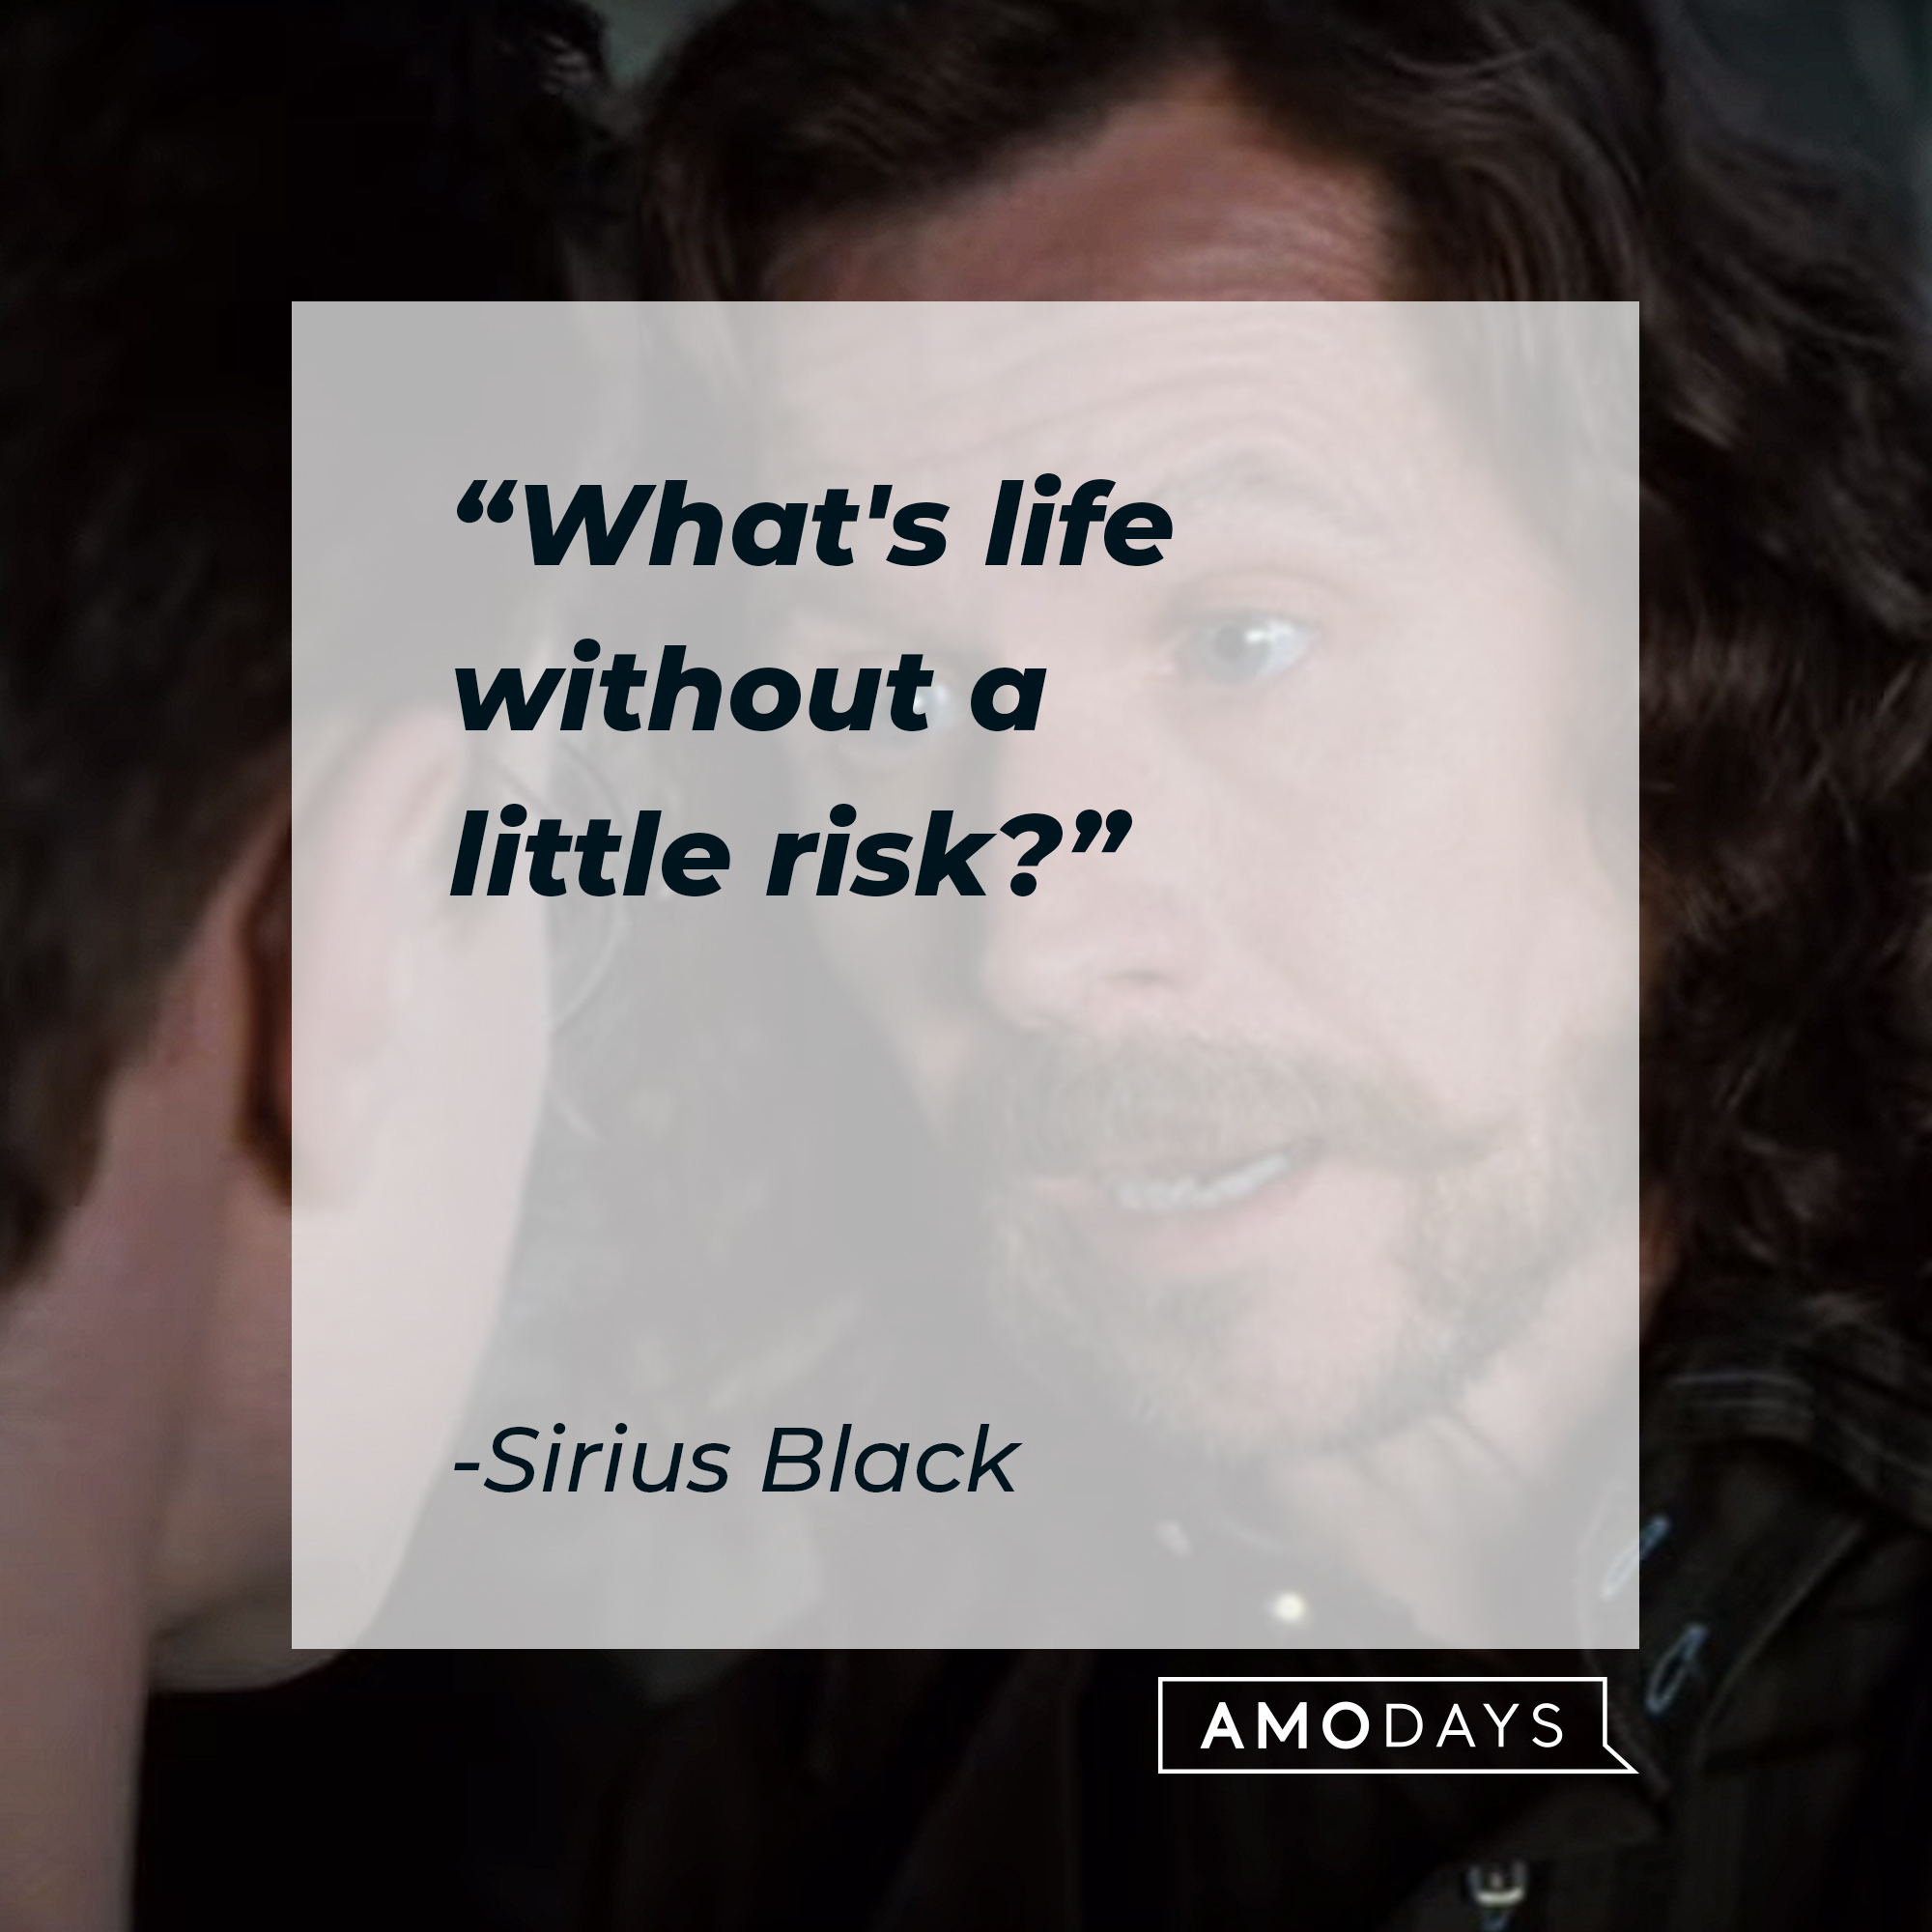 Sirius Black's quote: "What's life without a little risk?" | Source: YouTube/harrypotter